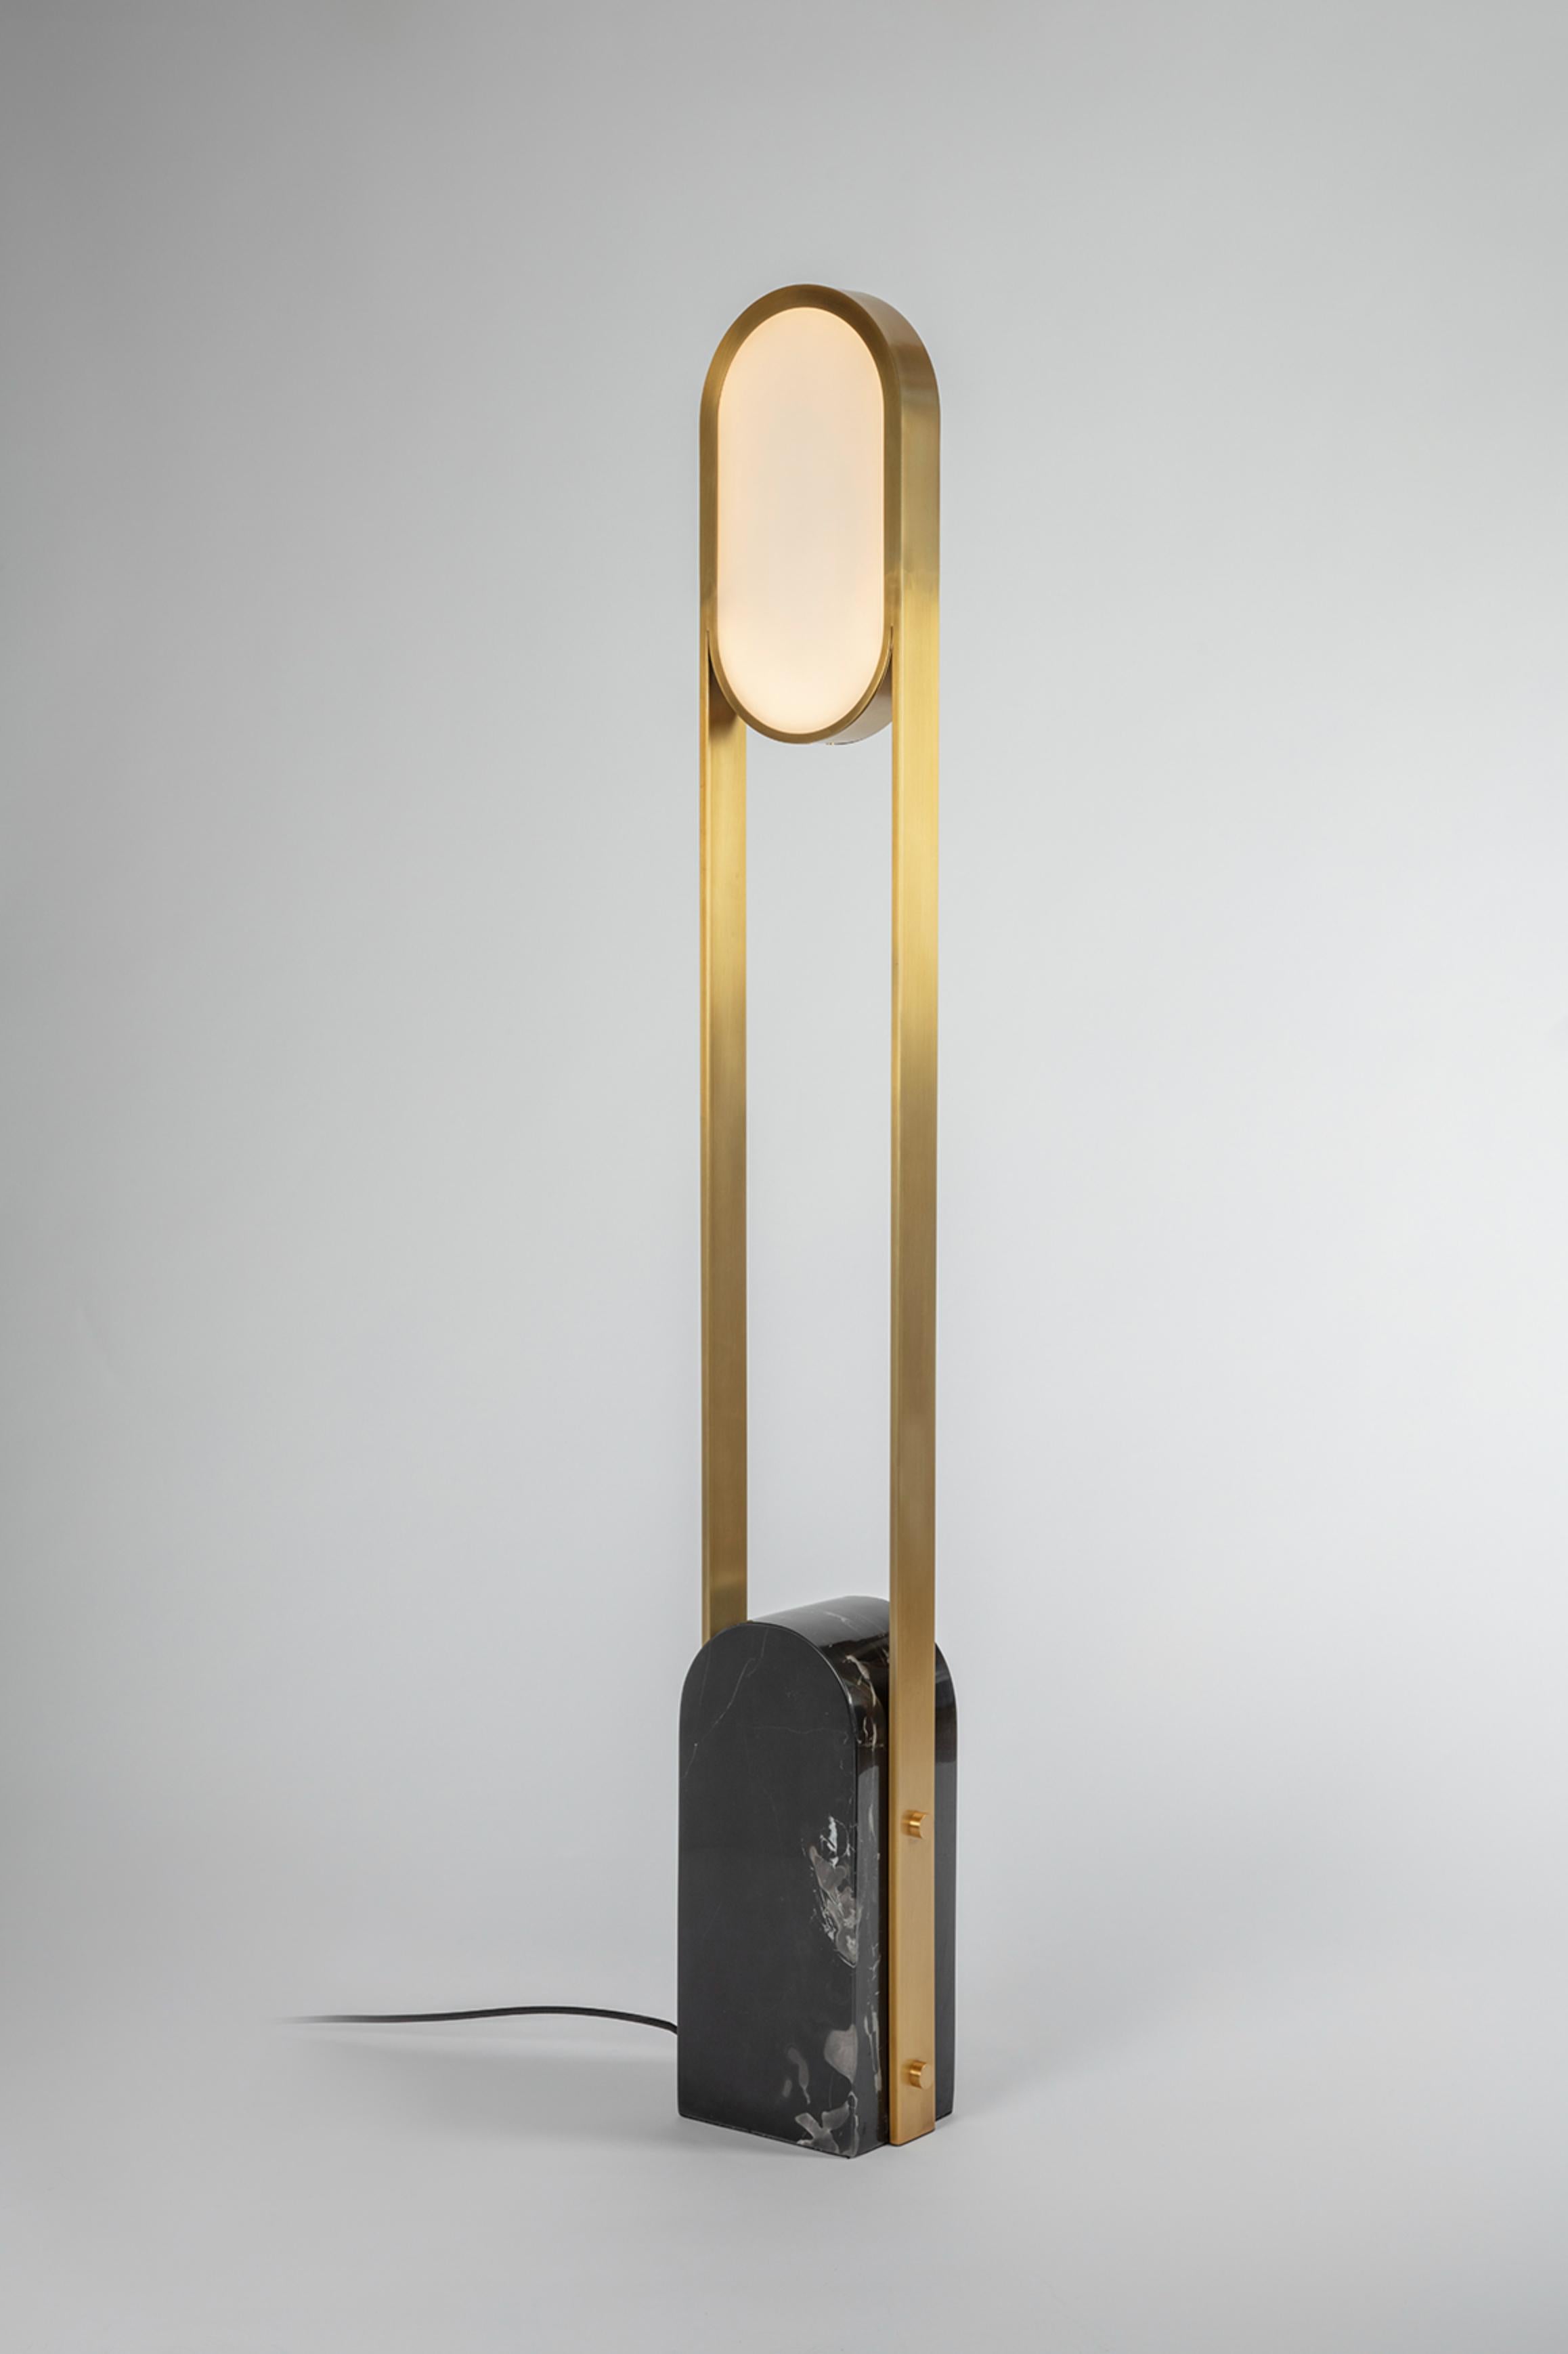 Pill floor lamp by square in circle.
Dimensions: D 14 x W 20 x H 145 cm.
Materials: brushed brass / black marble / white frosted glass.
Other finishes available.

A minimal floor lamp with a rounded block marble base. Brushed brass bands curve